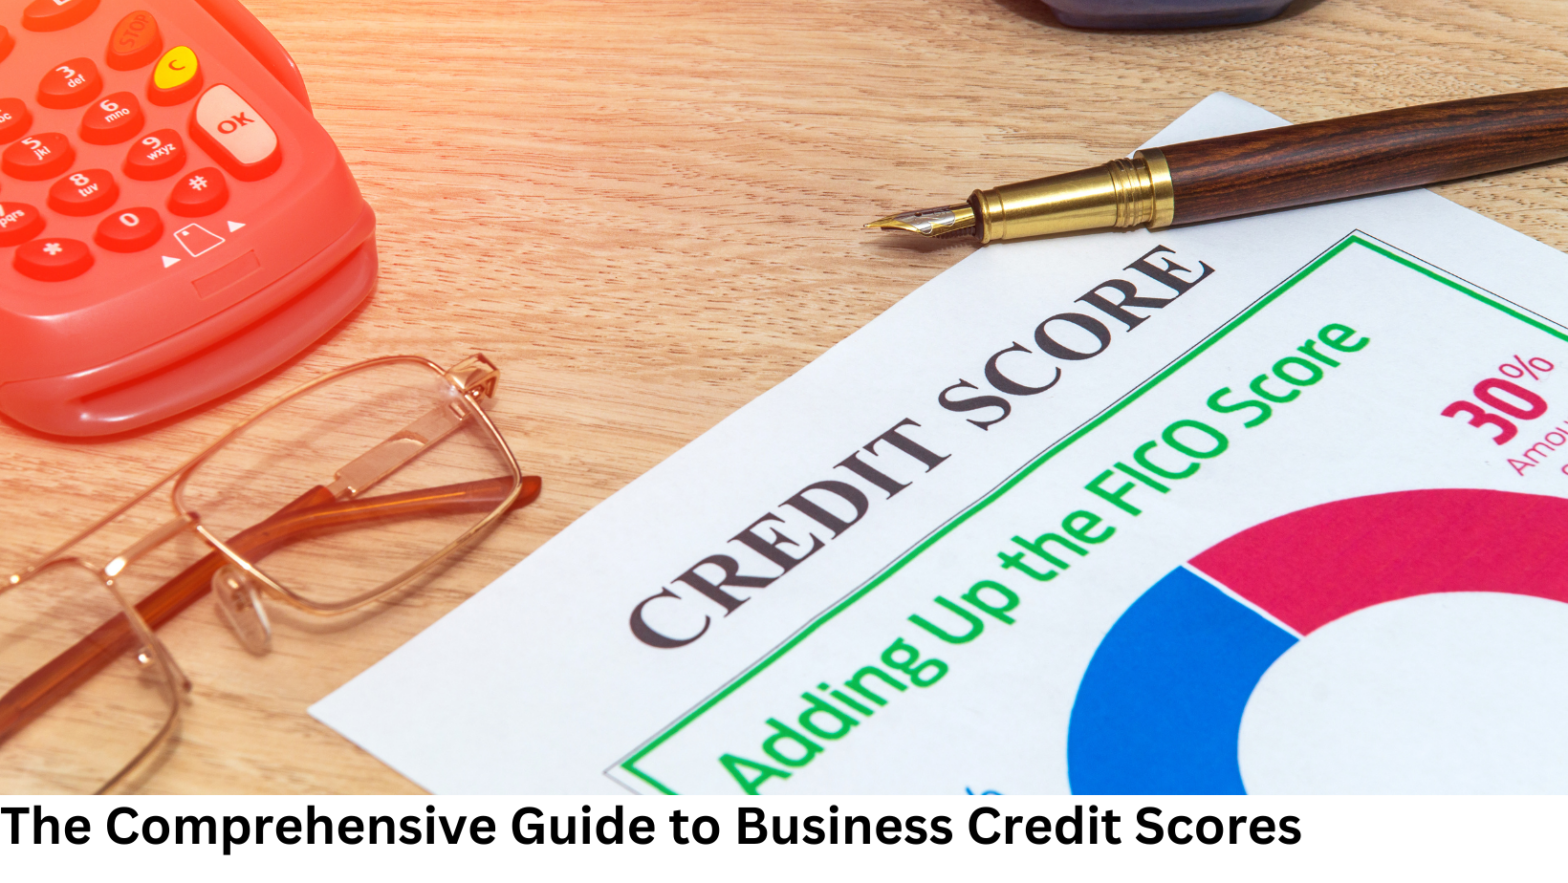 The Ultimate Guide to Better Business Credit Score